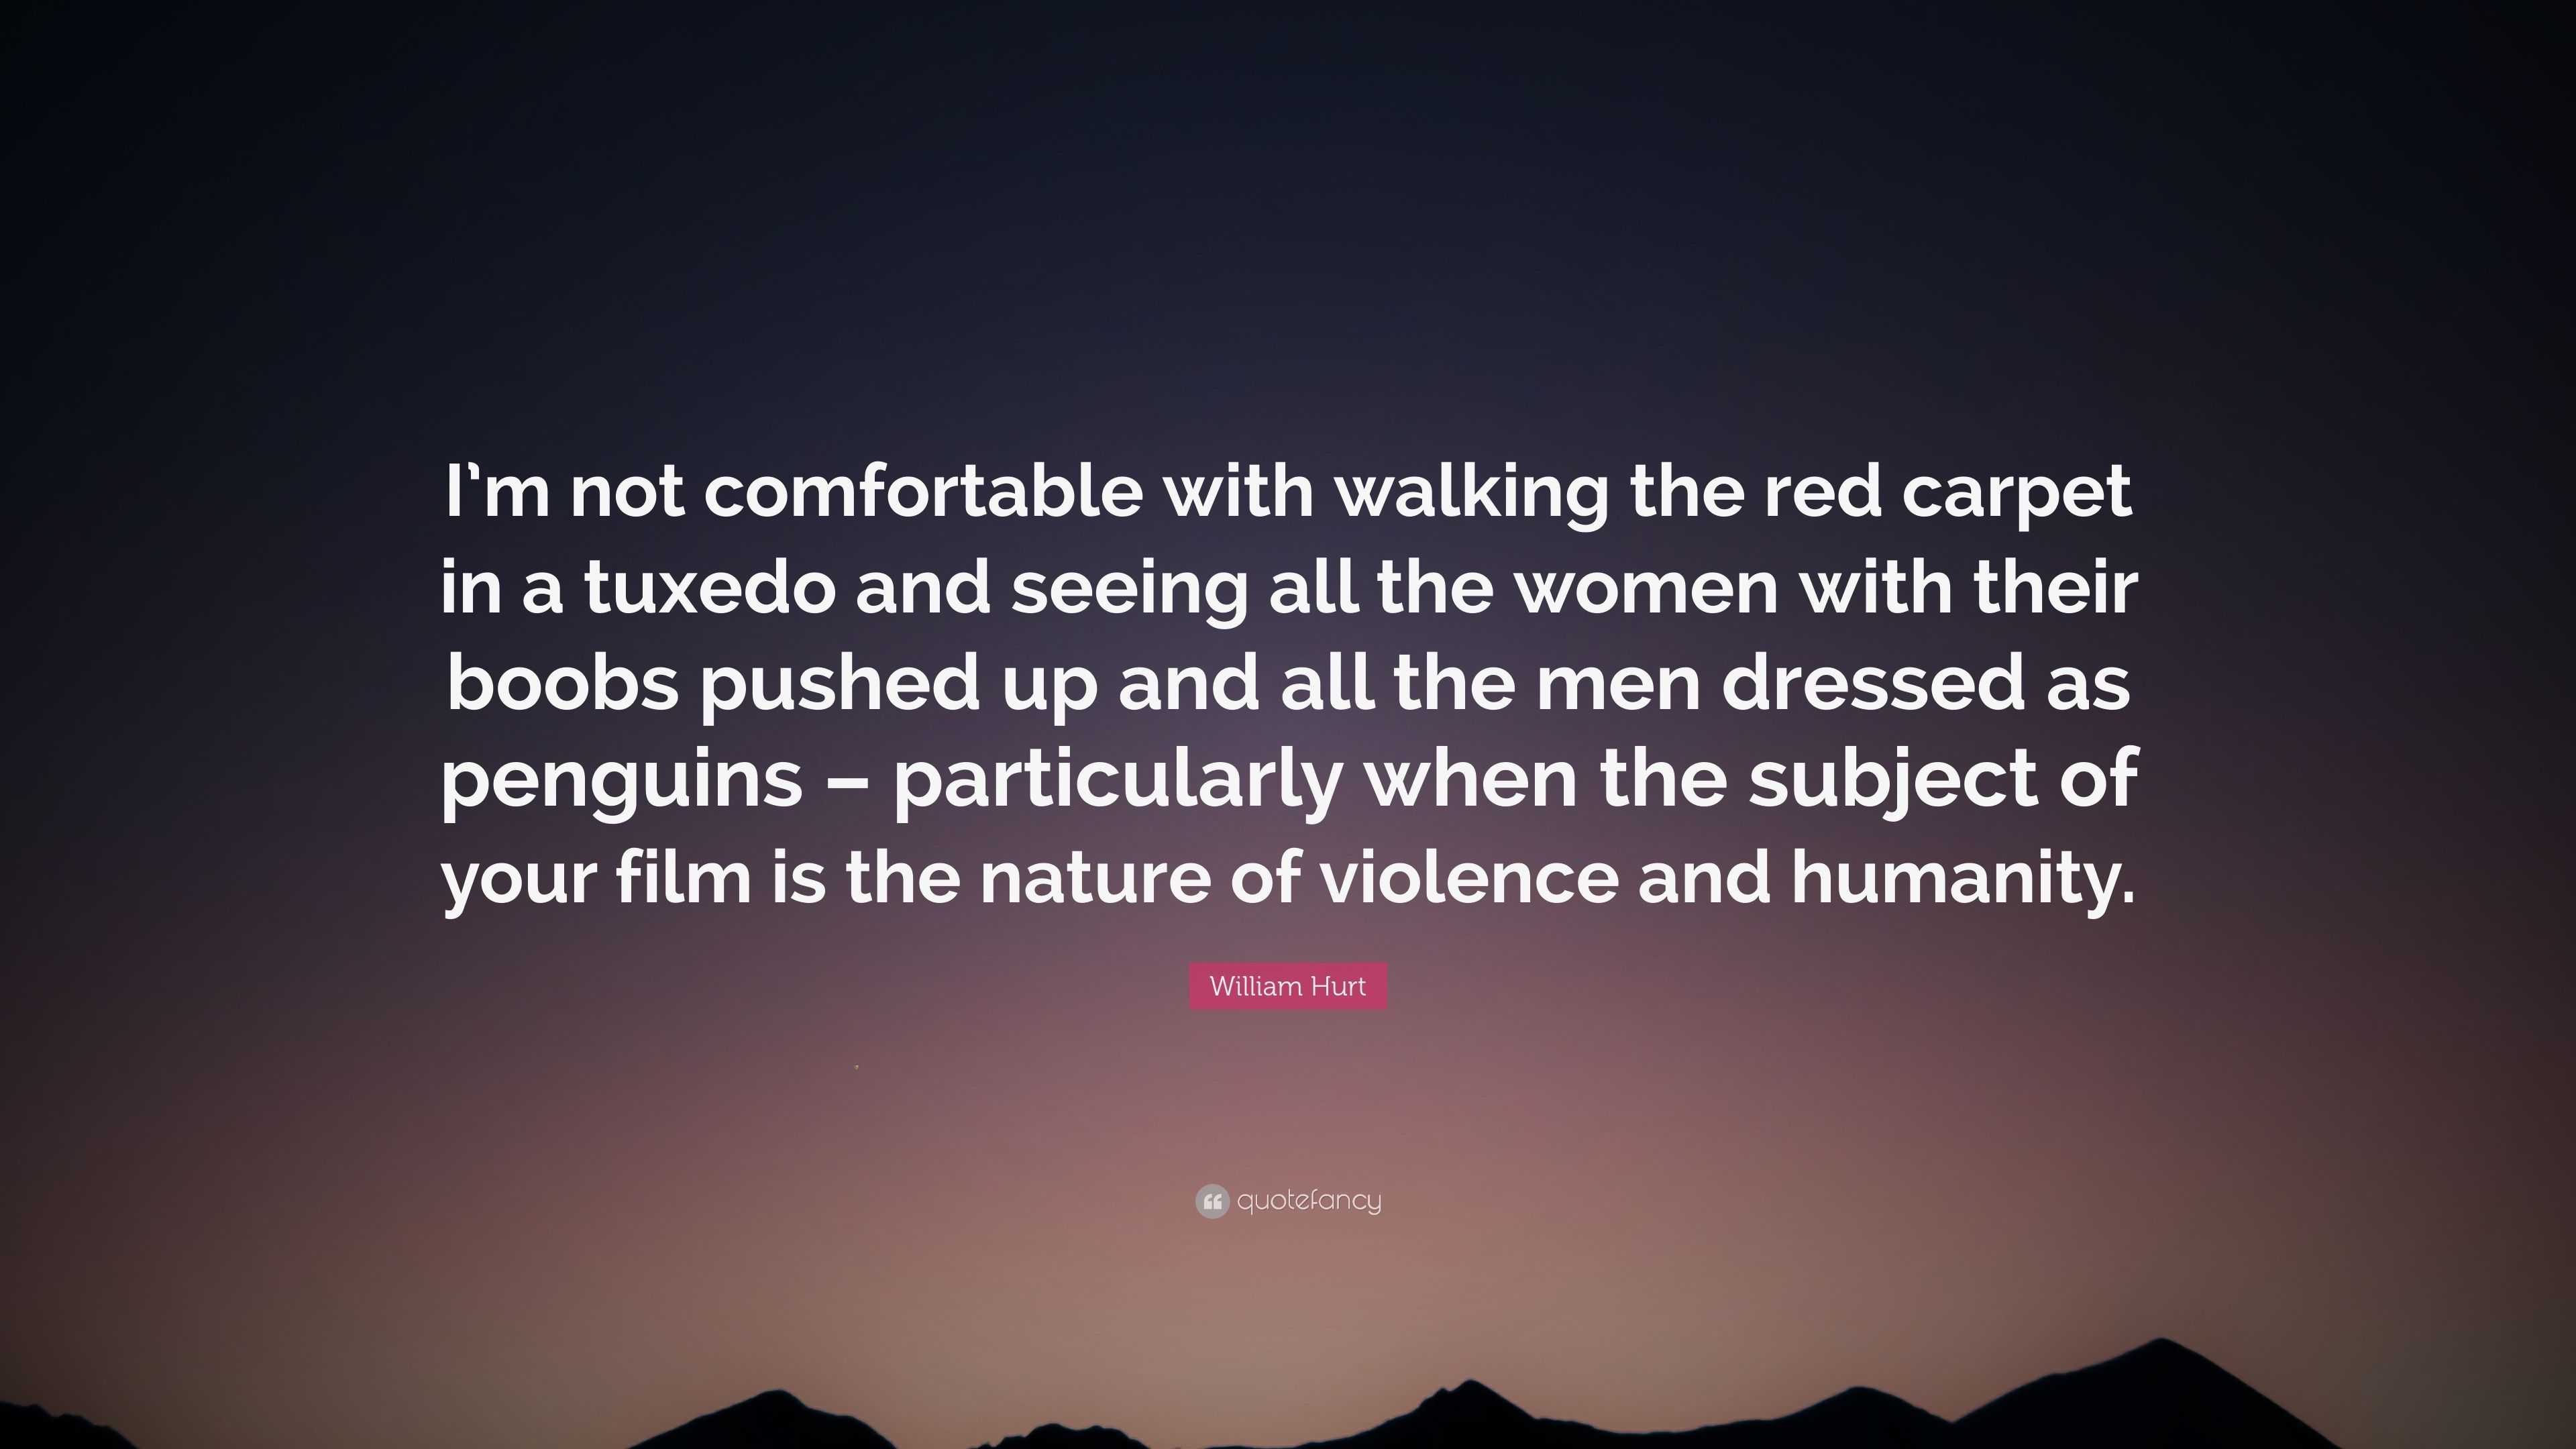 https://quotefancy.com/media/wallpaper/3840x2160/4358416-William-Hurt-Quote-I-m-not-comfortable-with-walking-the-red-carpet.jpg